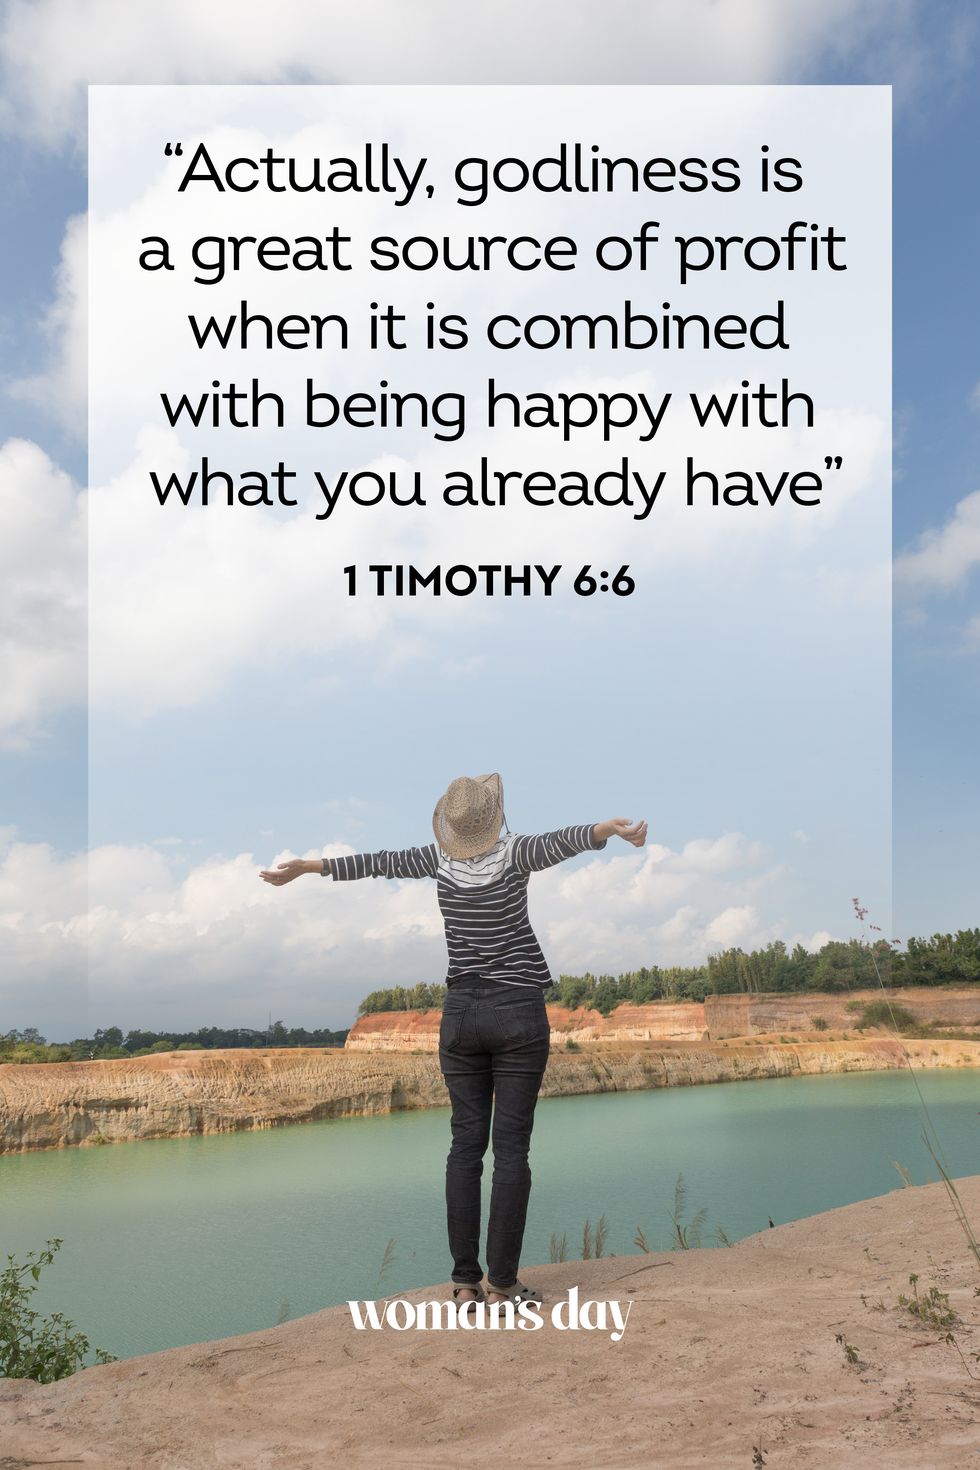 Bible Verse Images for: Being happy and enjoying life